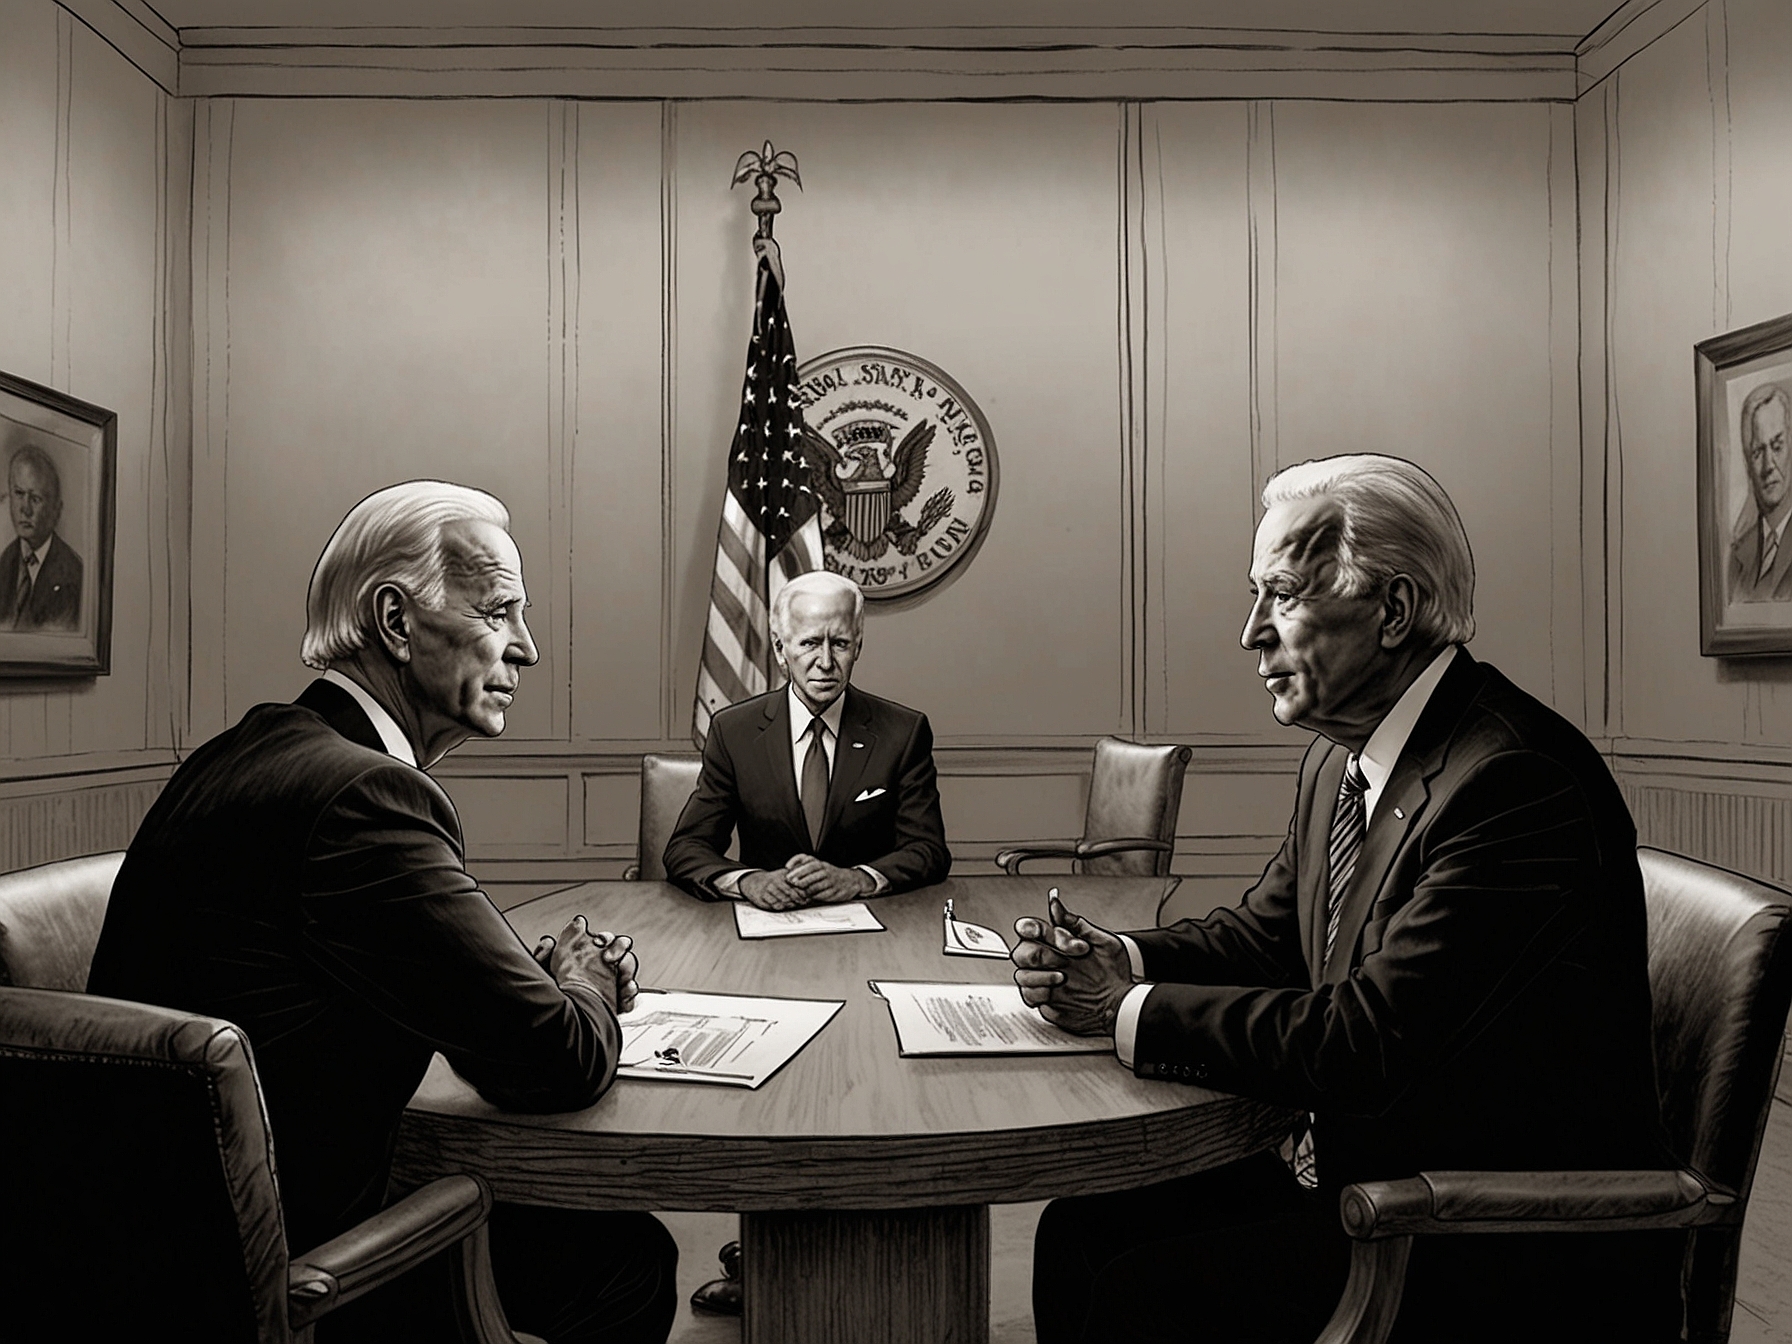 Democratic leaders in a meeting room, deliberating over Biden's potential replacement and strategizing for the 2024 presidential election, amidst rising concerns about his candidacy.